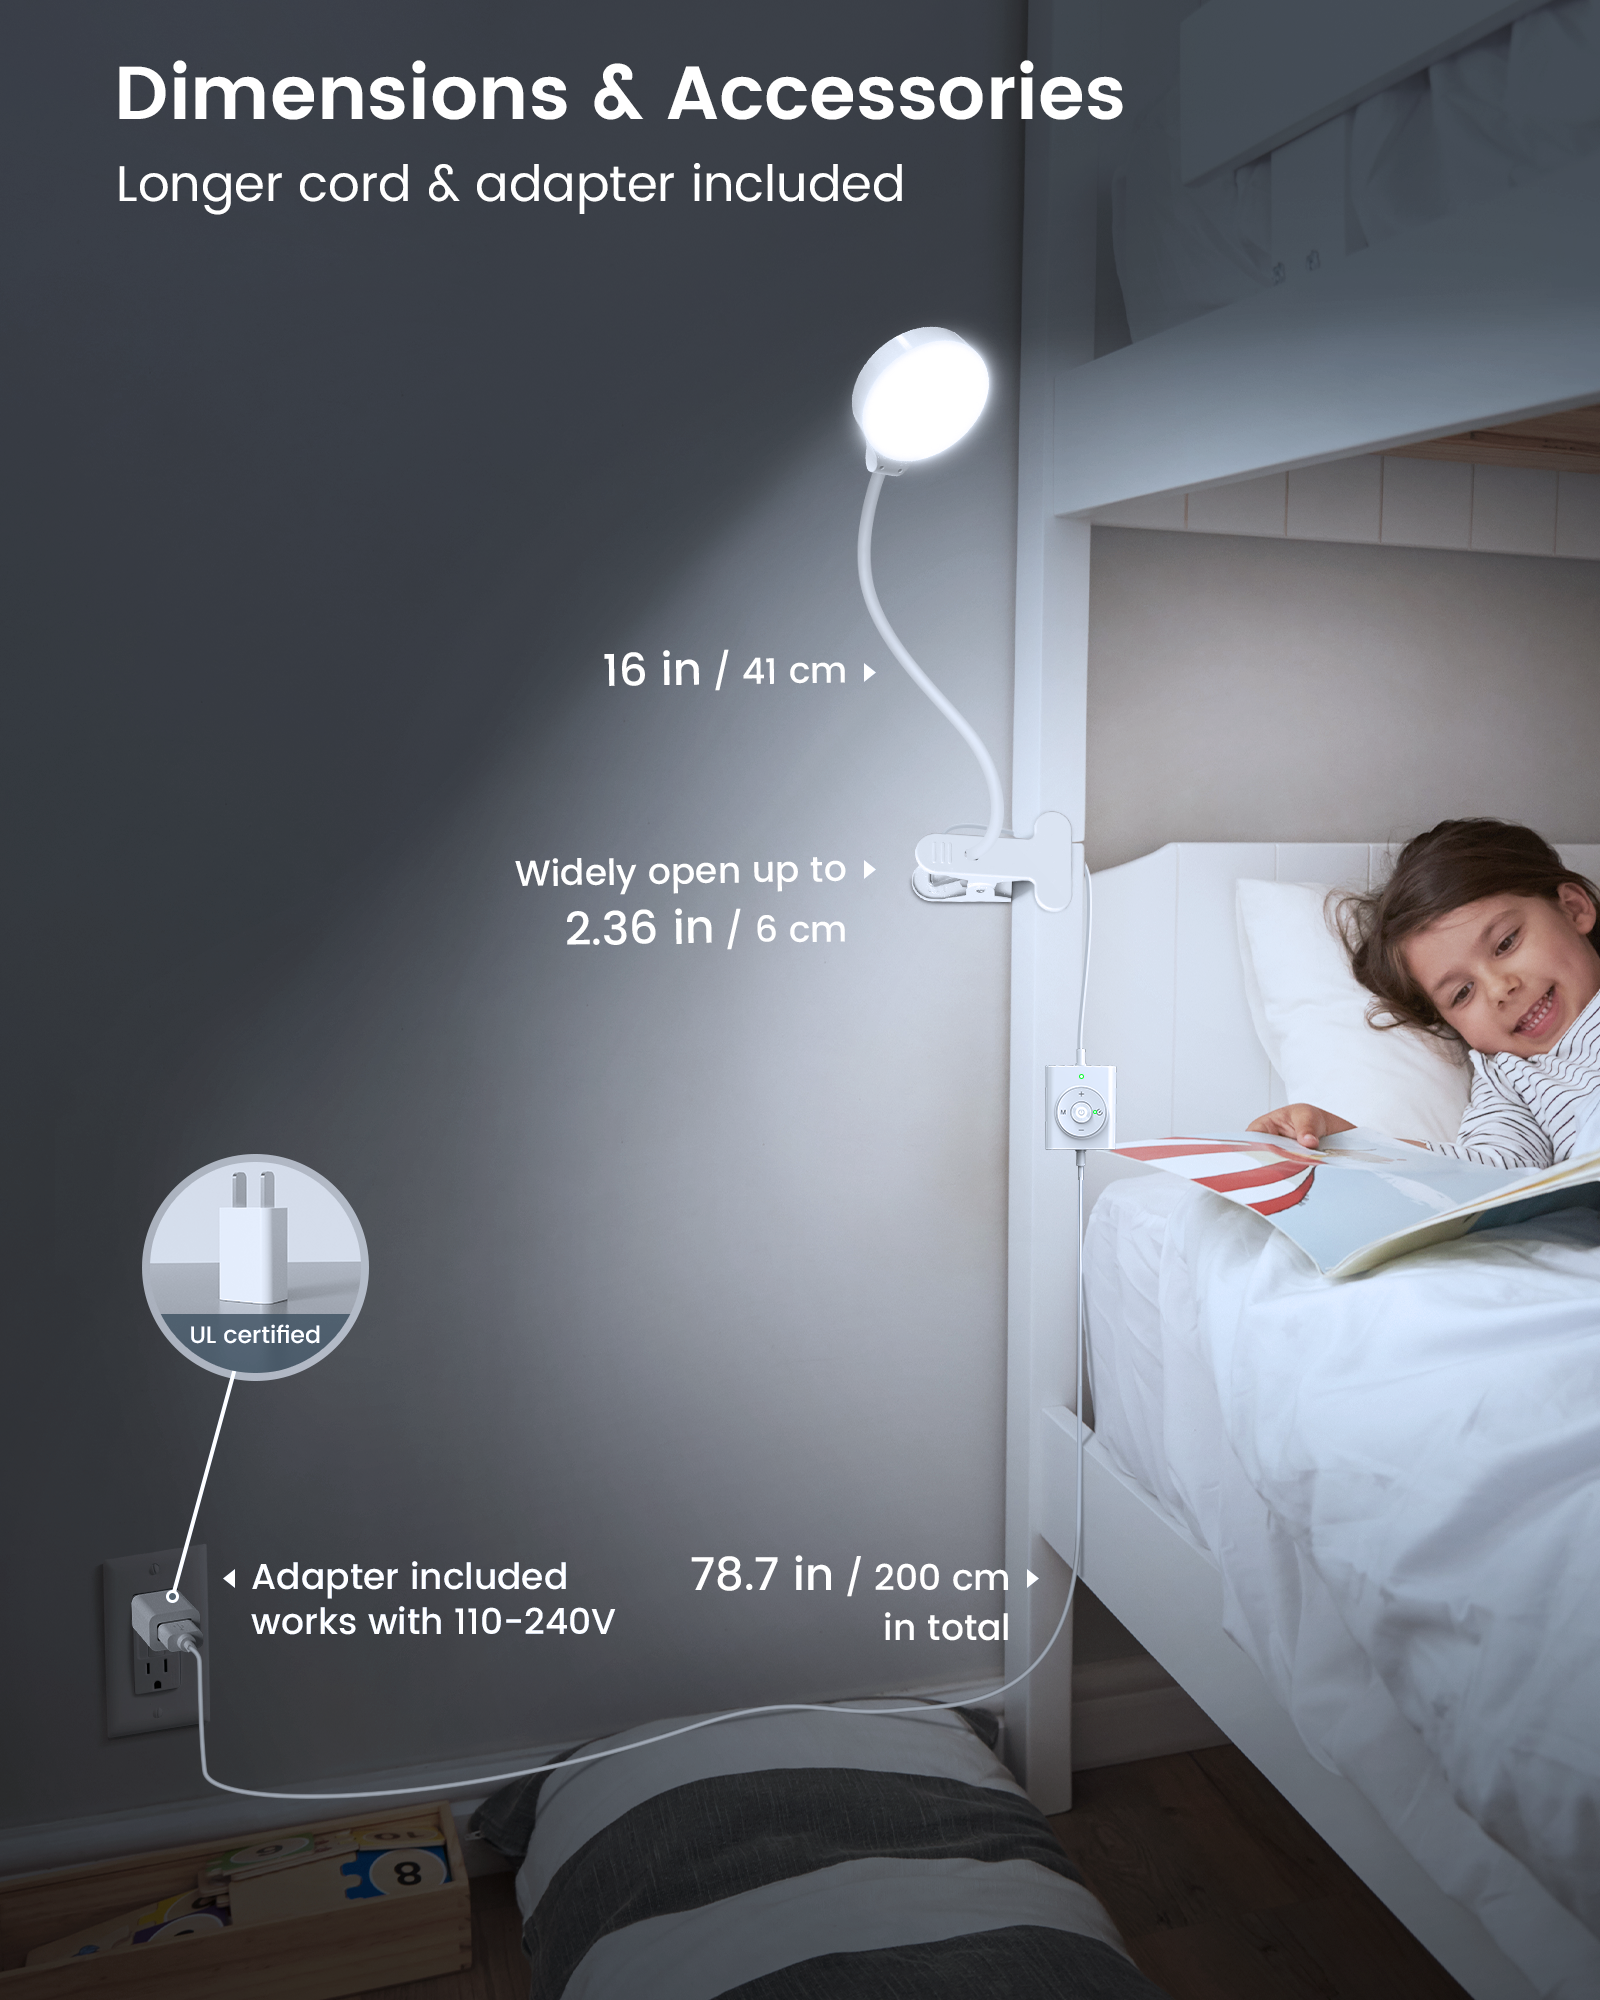 Glocusent LED Neck Reading Light, Book Light for Reading in Bed, 3 Colors, 6 for